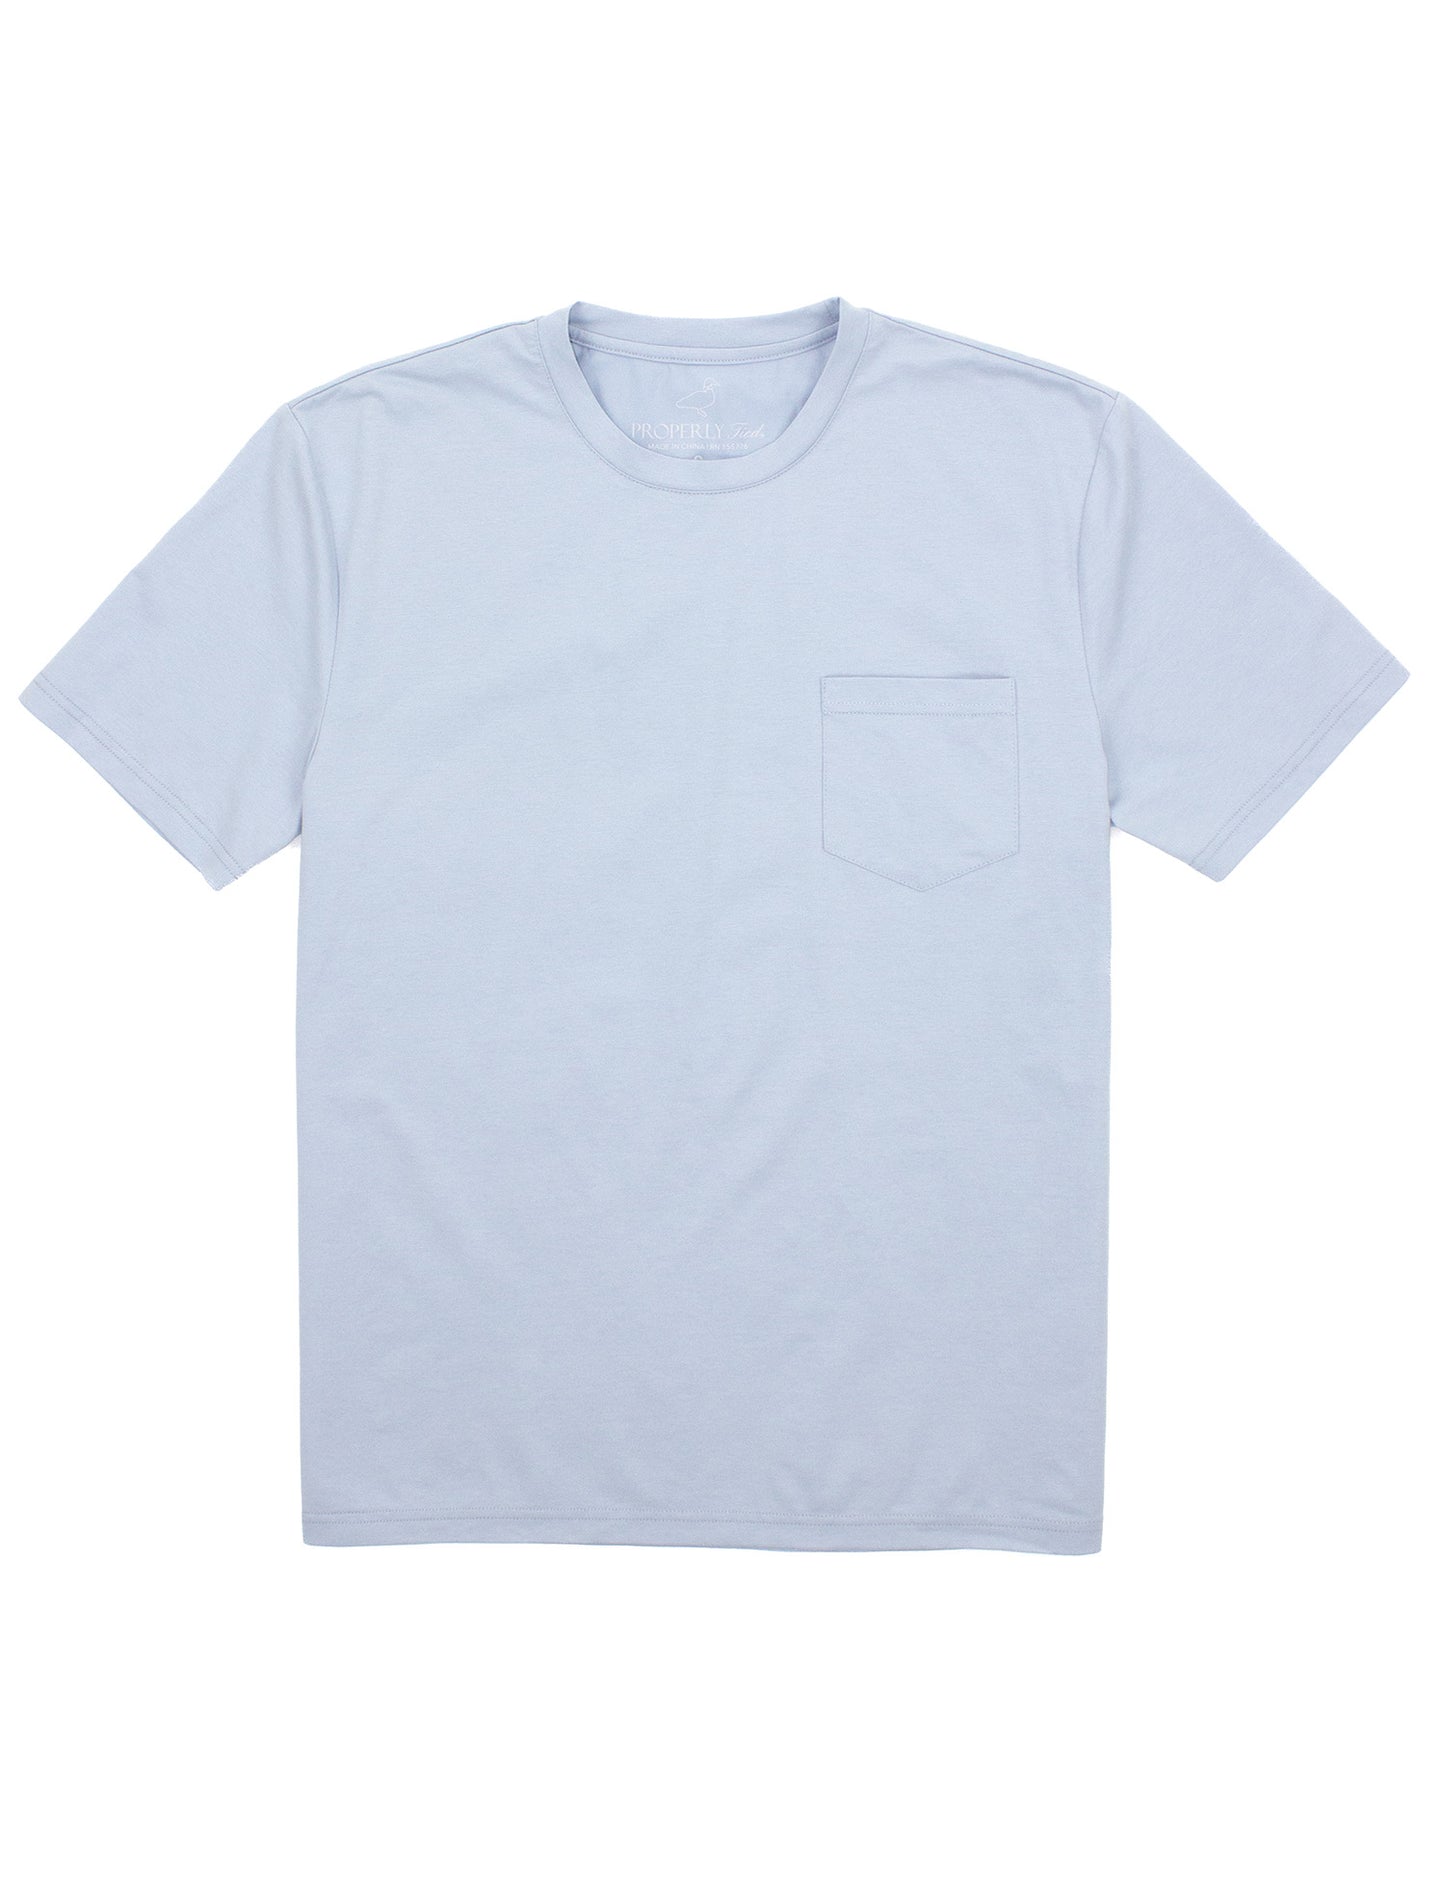 PT Valley Tee SS, Topsail Blue